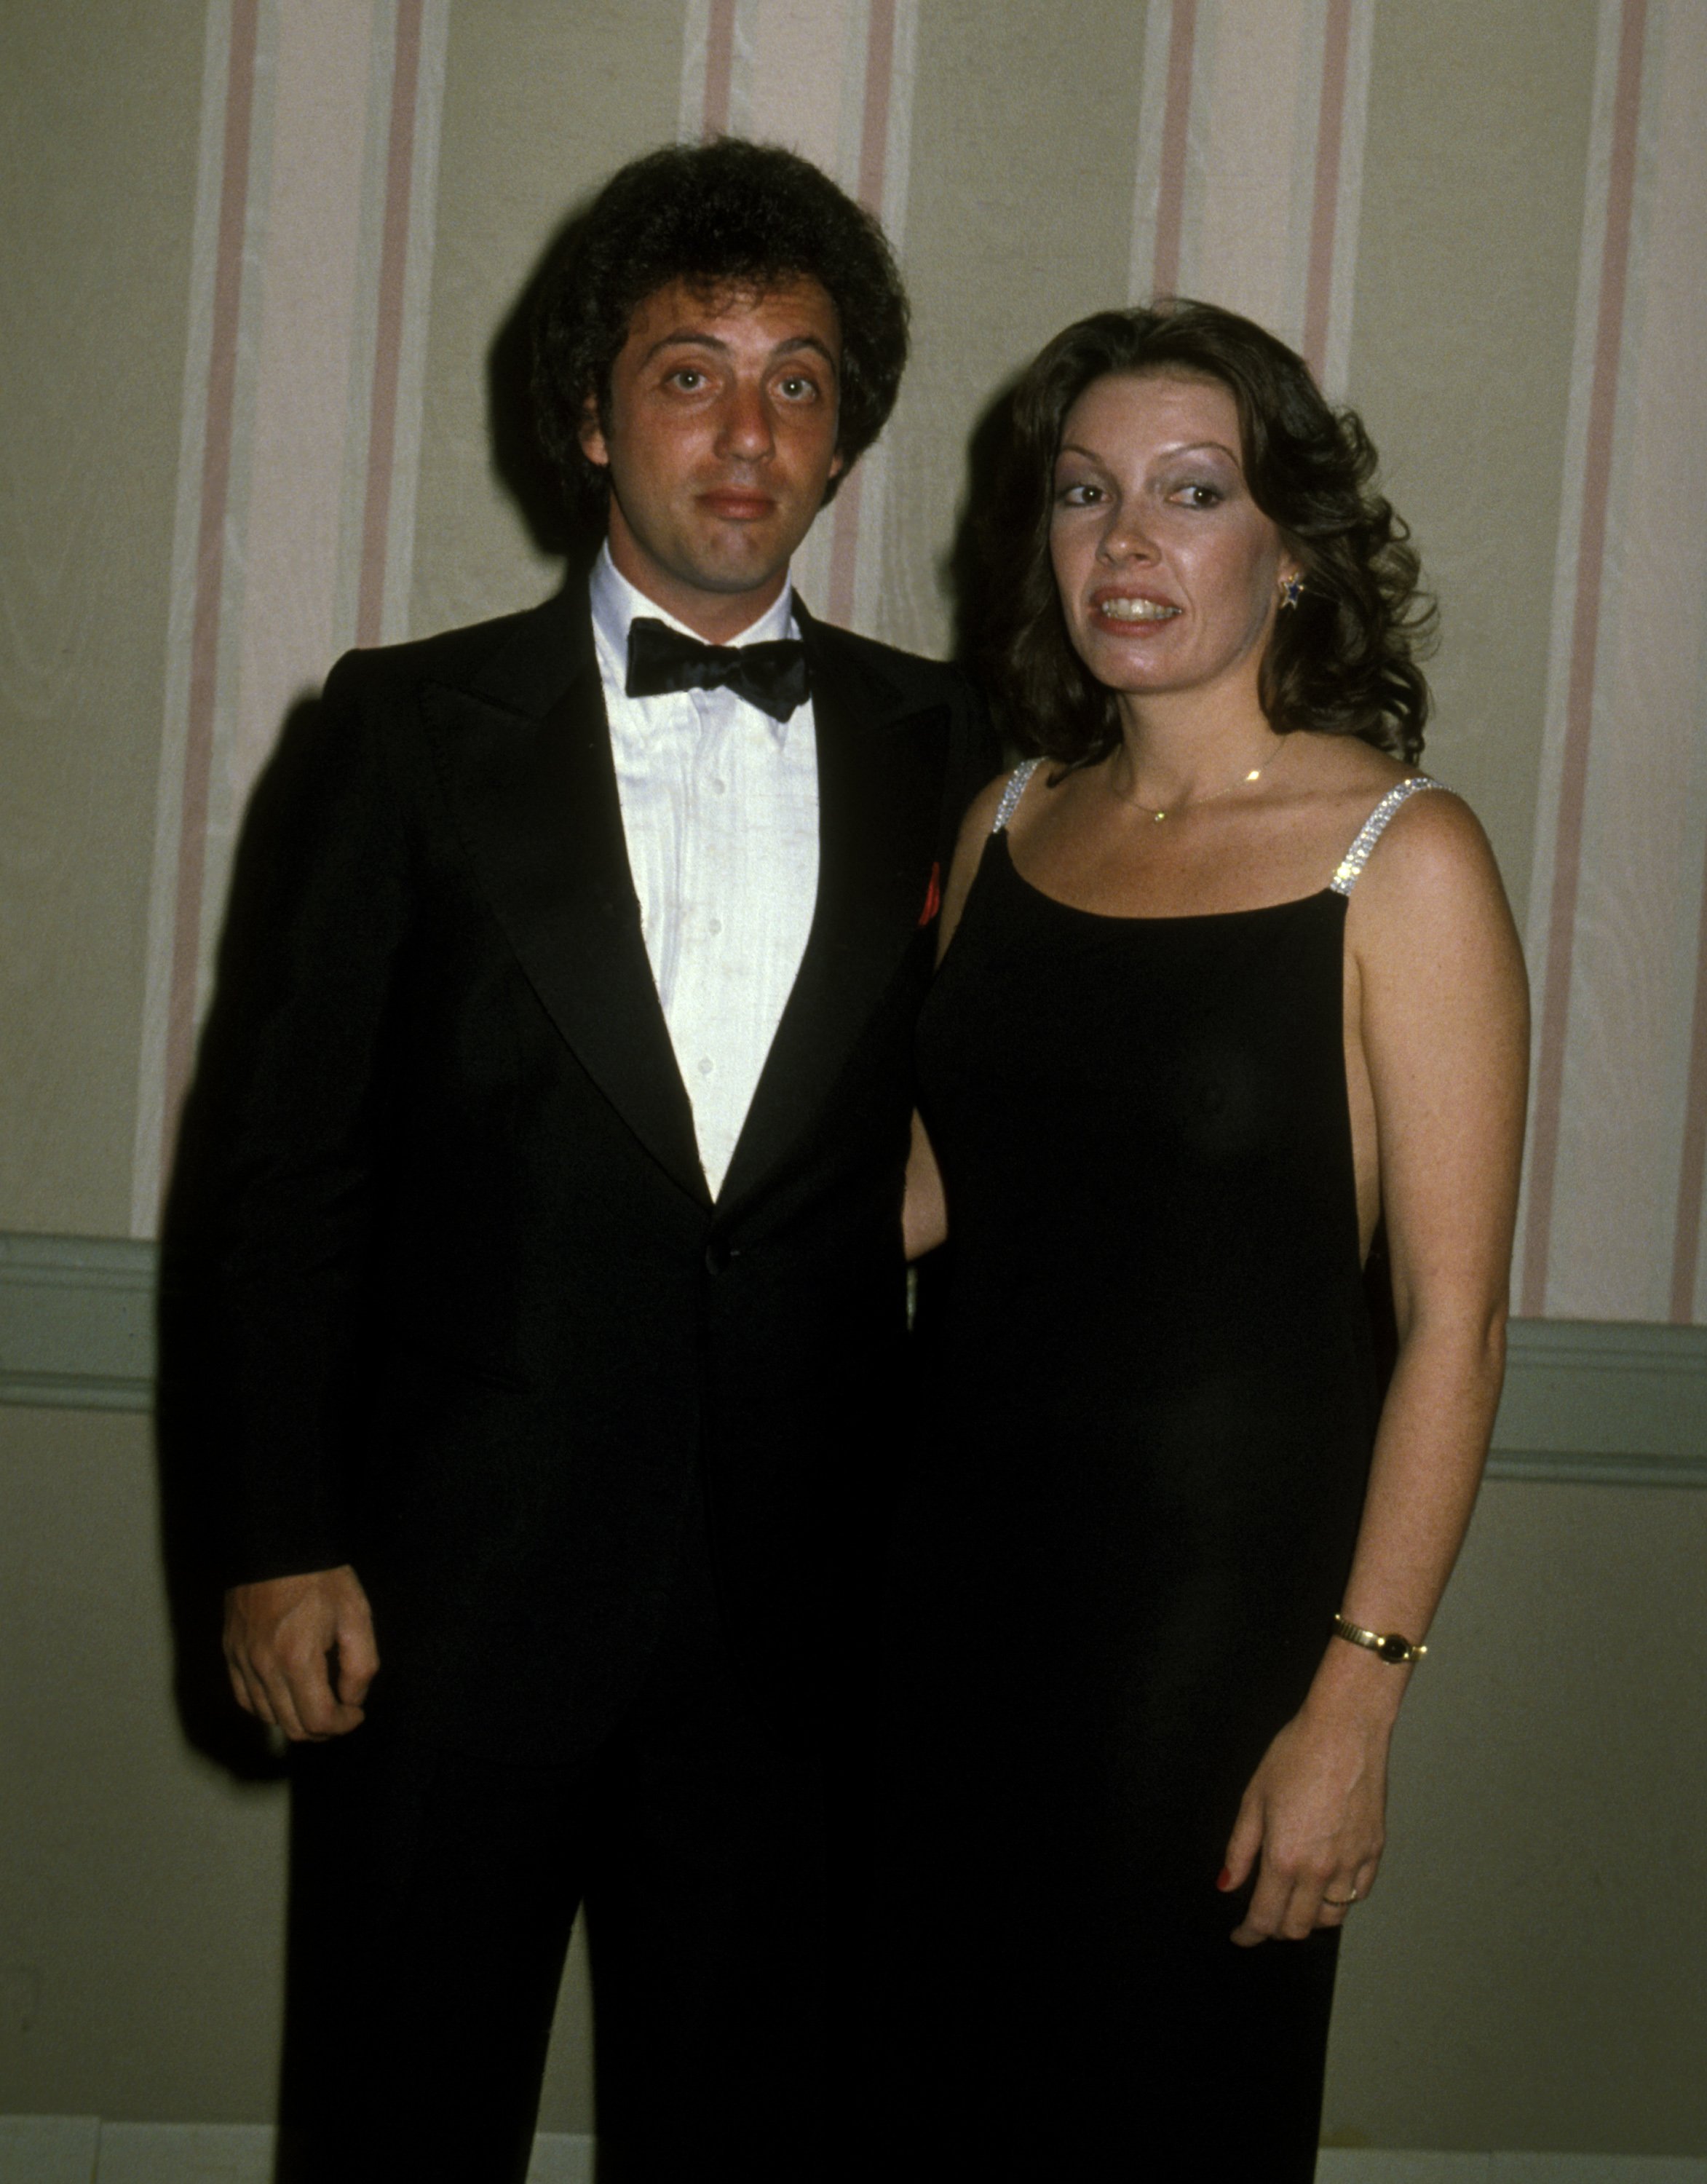 Billy Joel and Elizabeth Weber at the Music & Performing Arts Lodge of B'nai B'rith on June 9, 1979. / Source: Getty Images